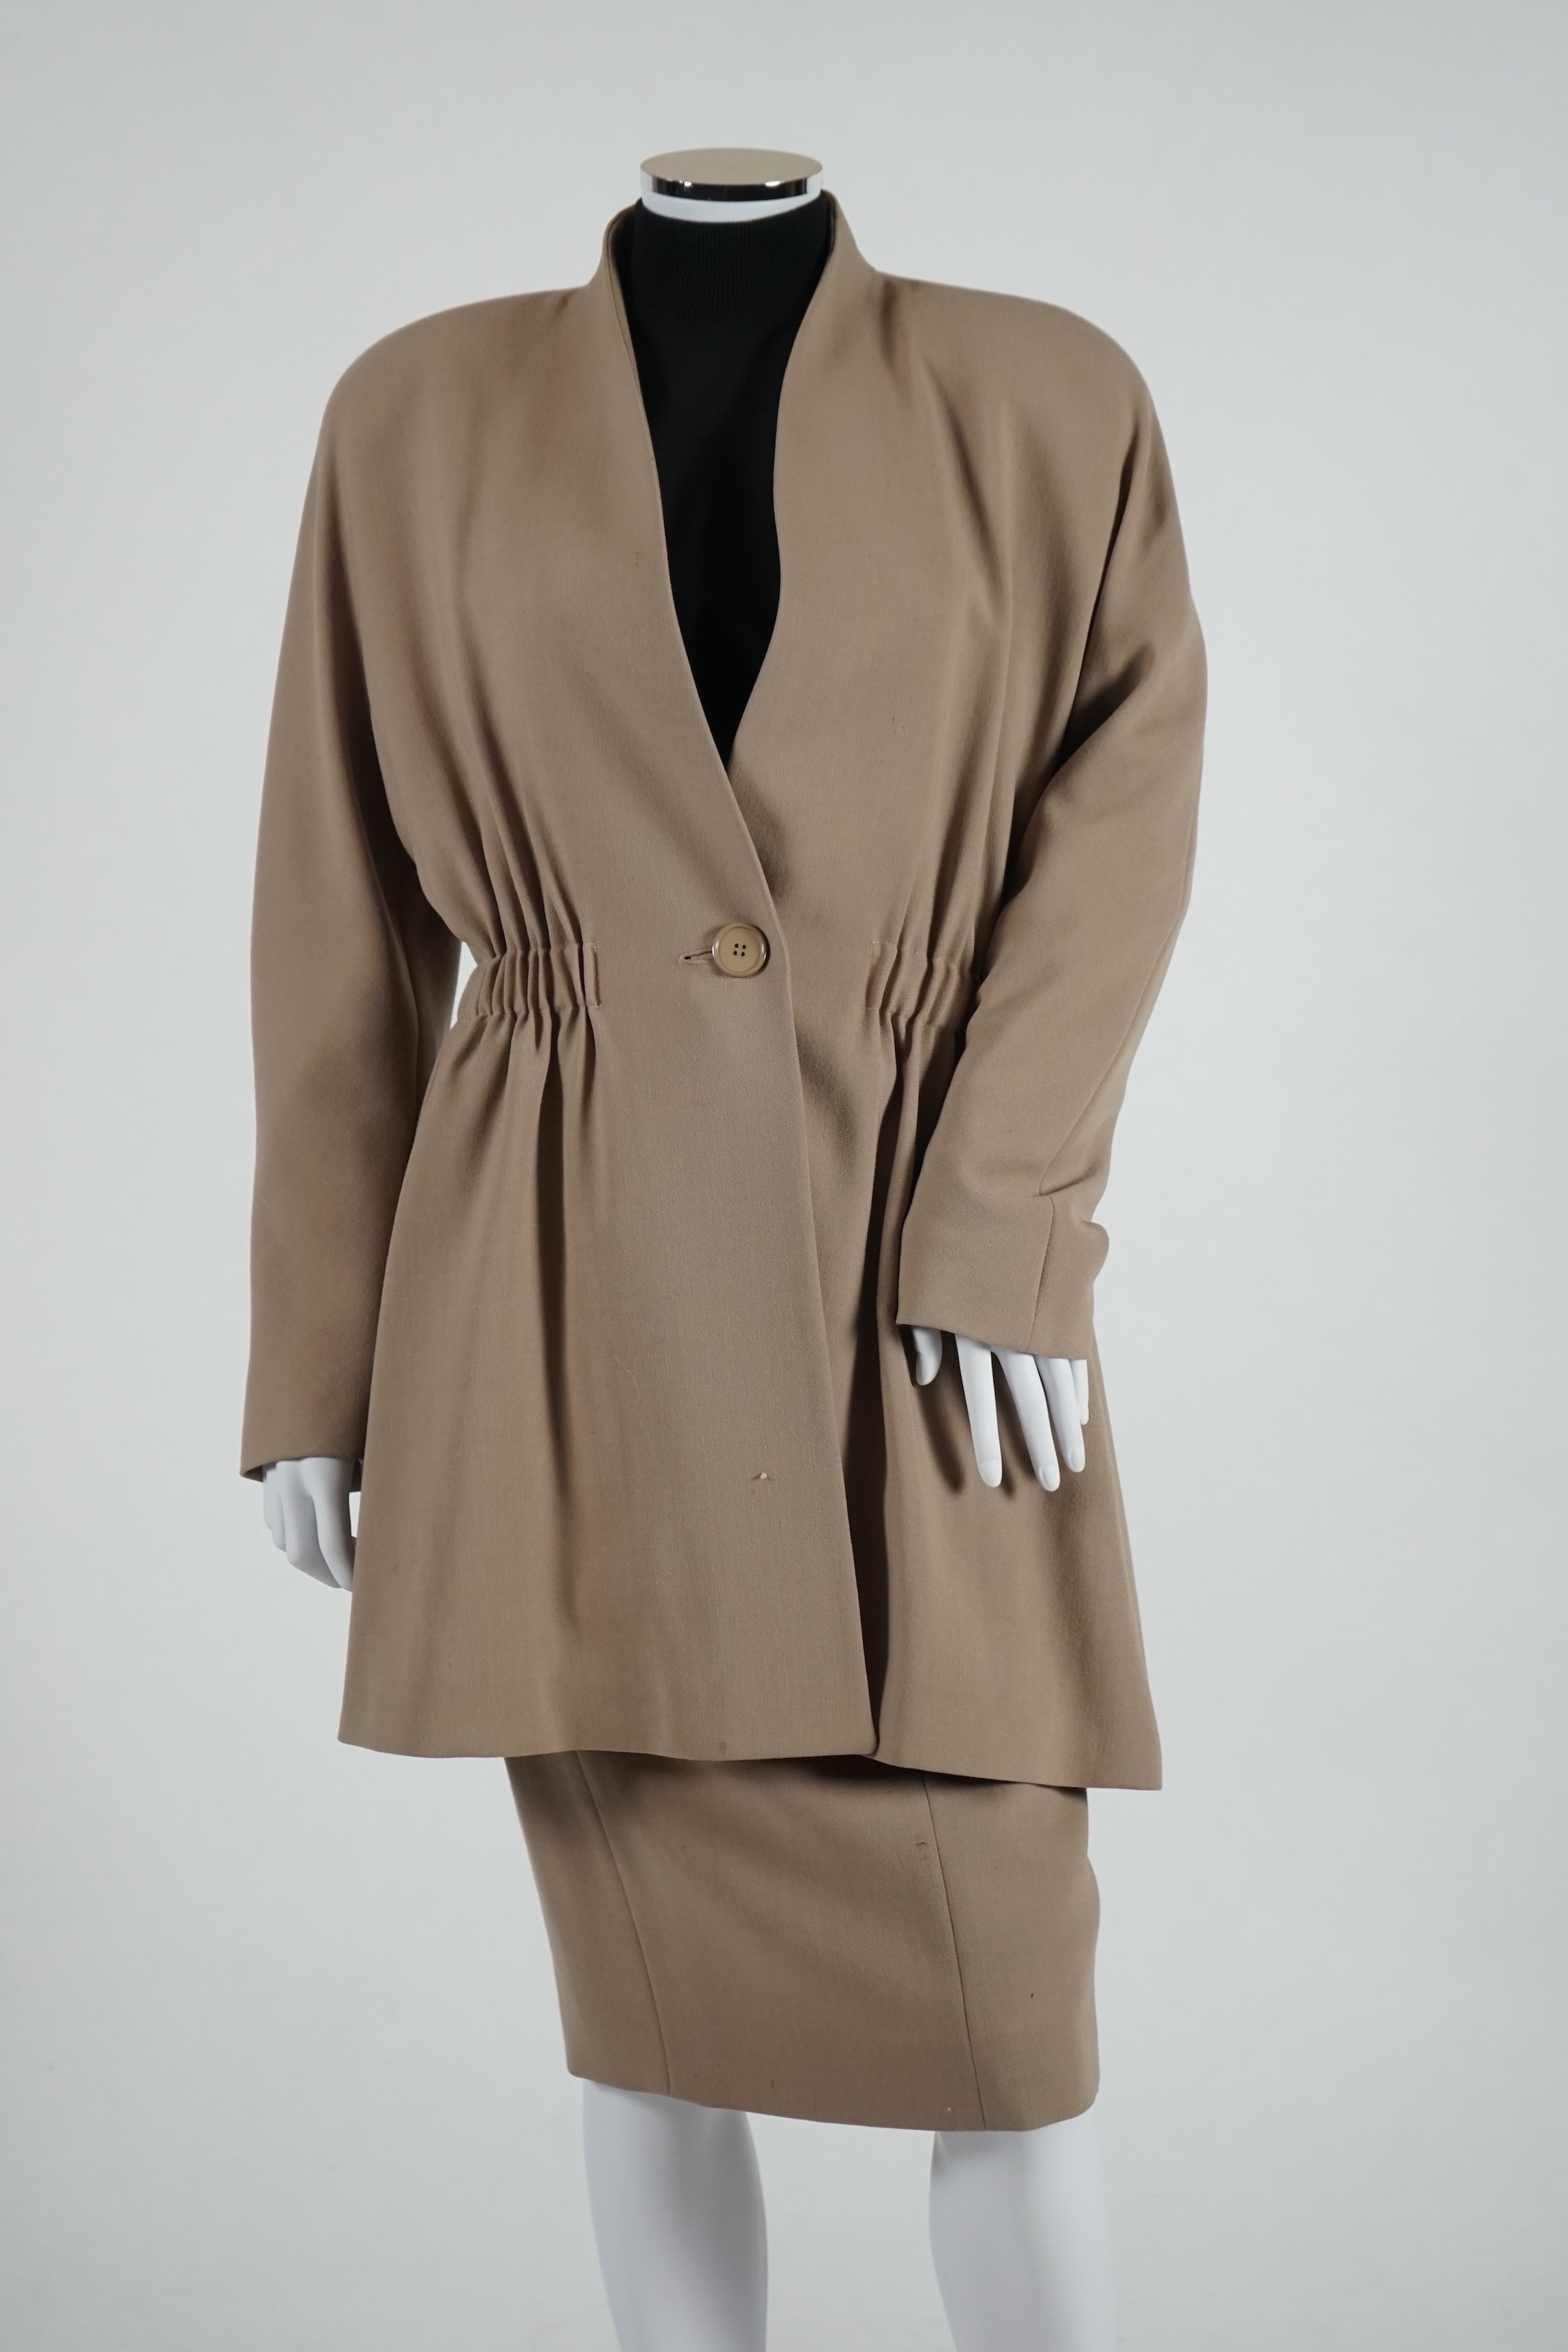 A lady's Akris Club suit with black turtle neck blouse and belt, UK Size 8. Proceeds to Happy Paws Puppy Rescue